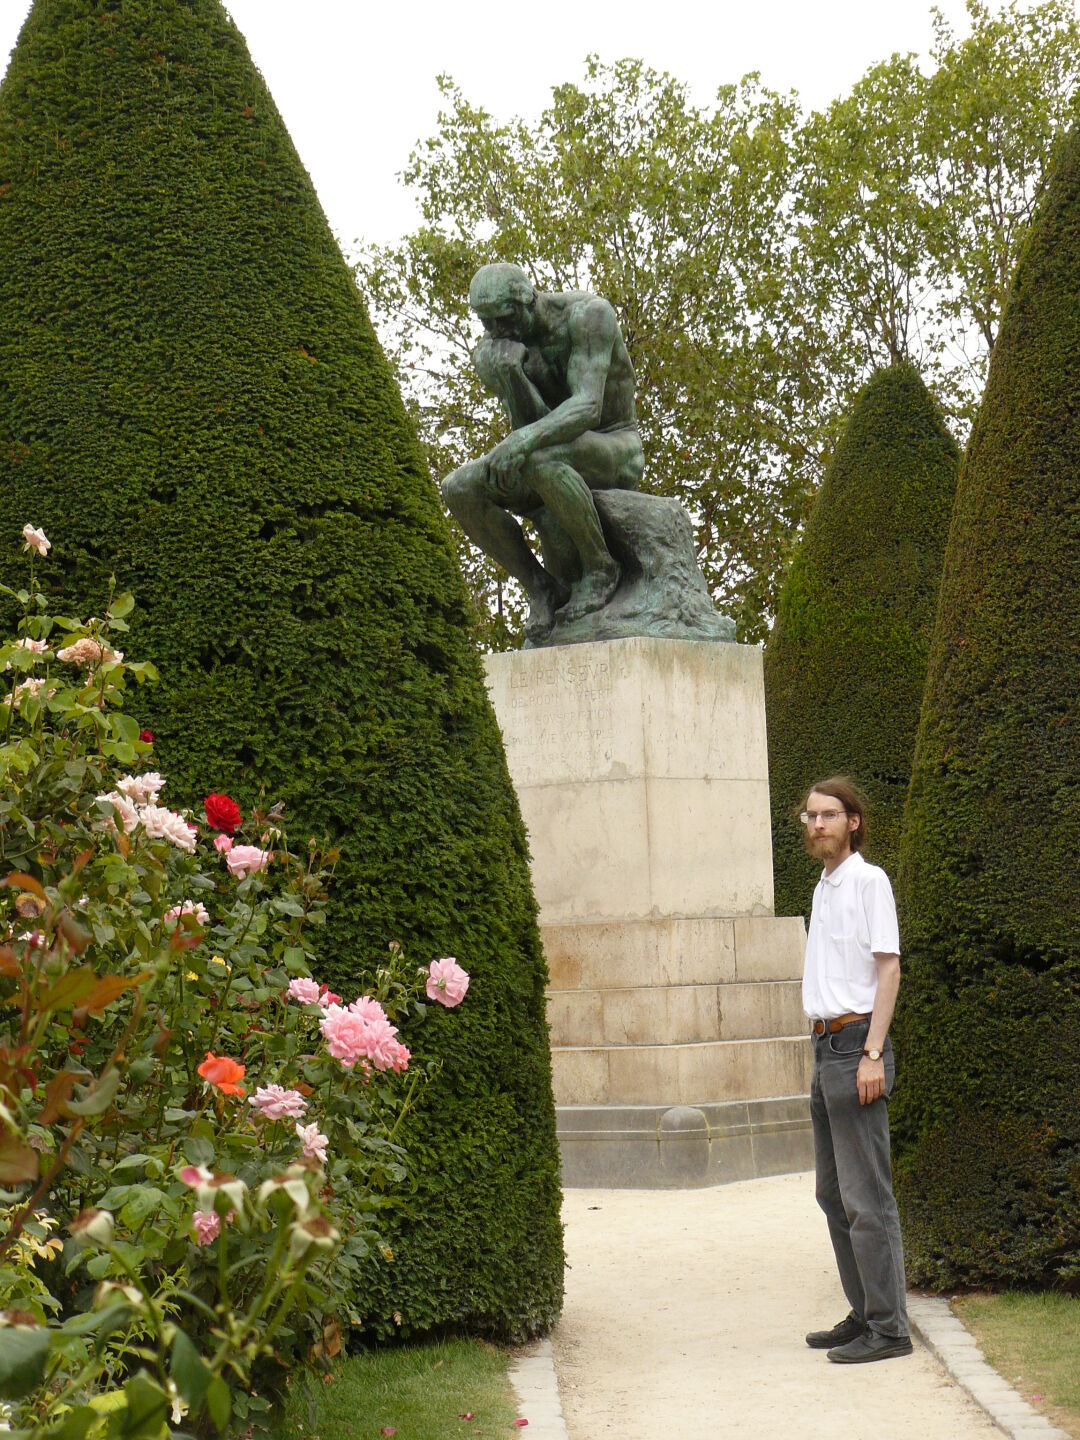 &quot;The Thinker&quot; by Rodin.